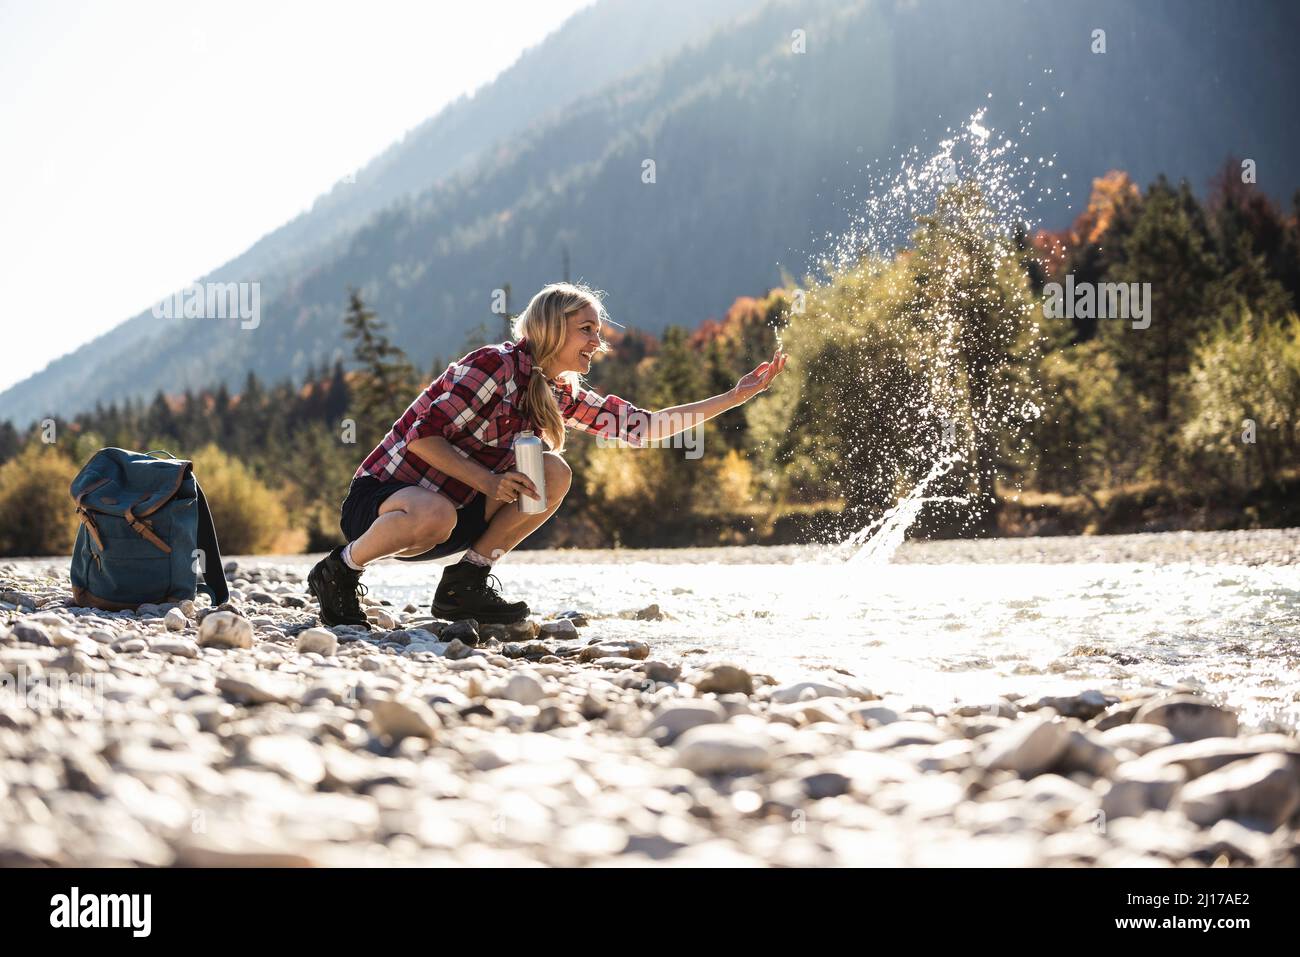 Austria, Alps, woman on a hiking trip splashing with water at a brook Stock Photo